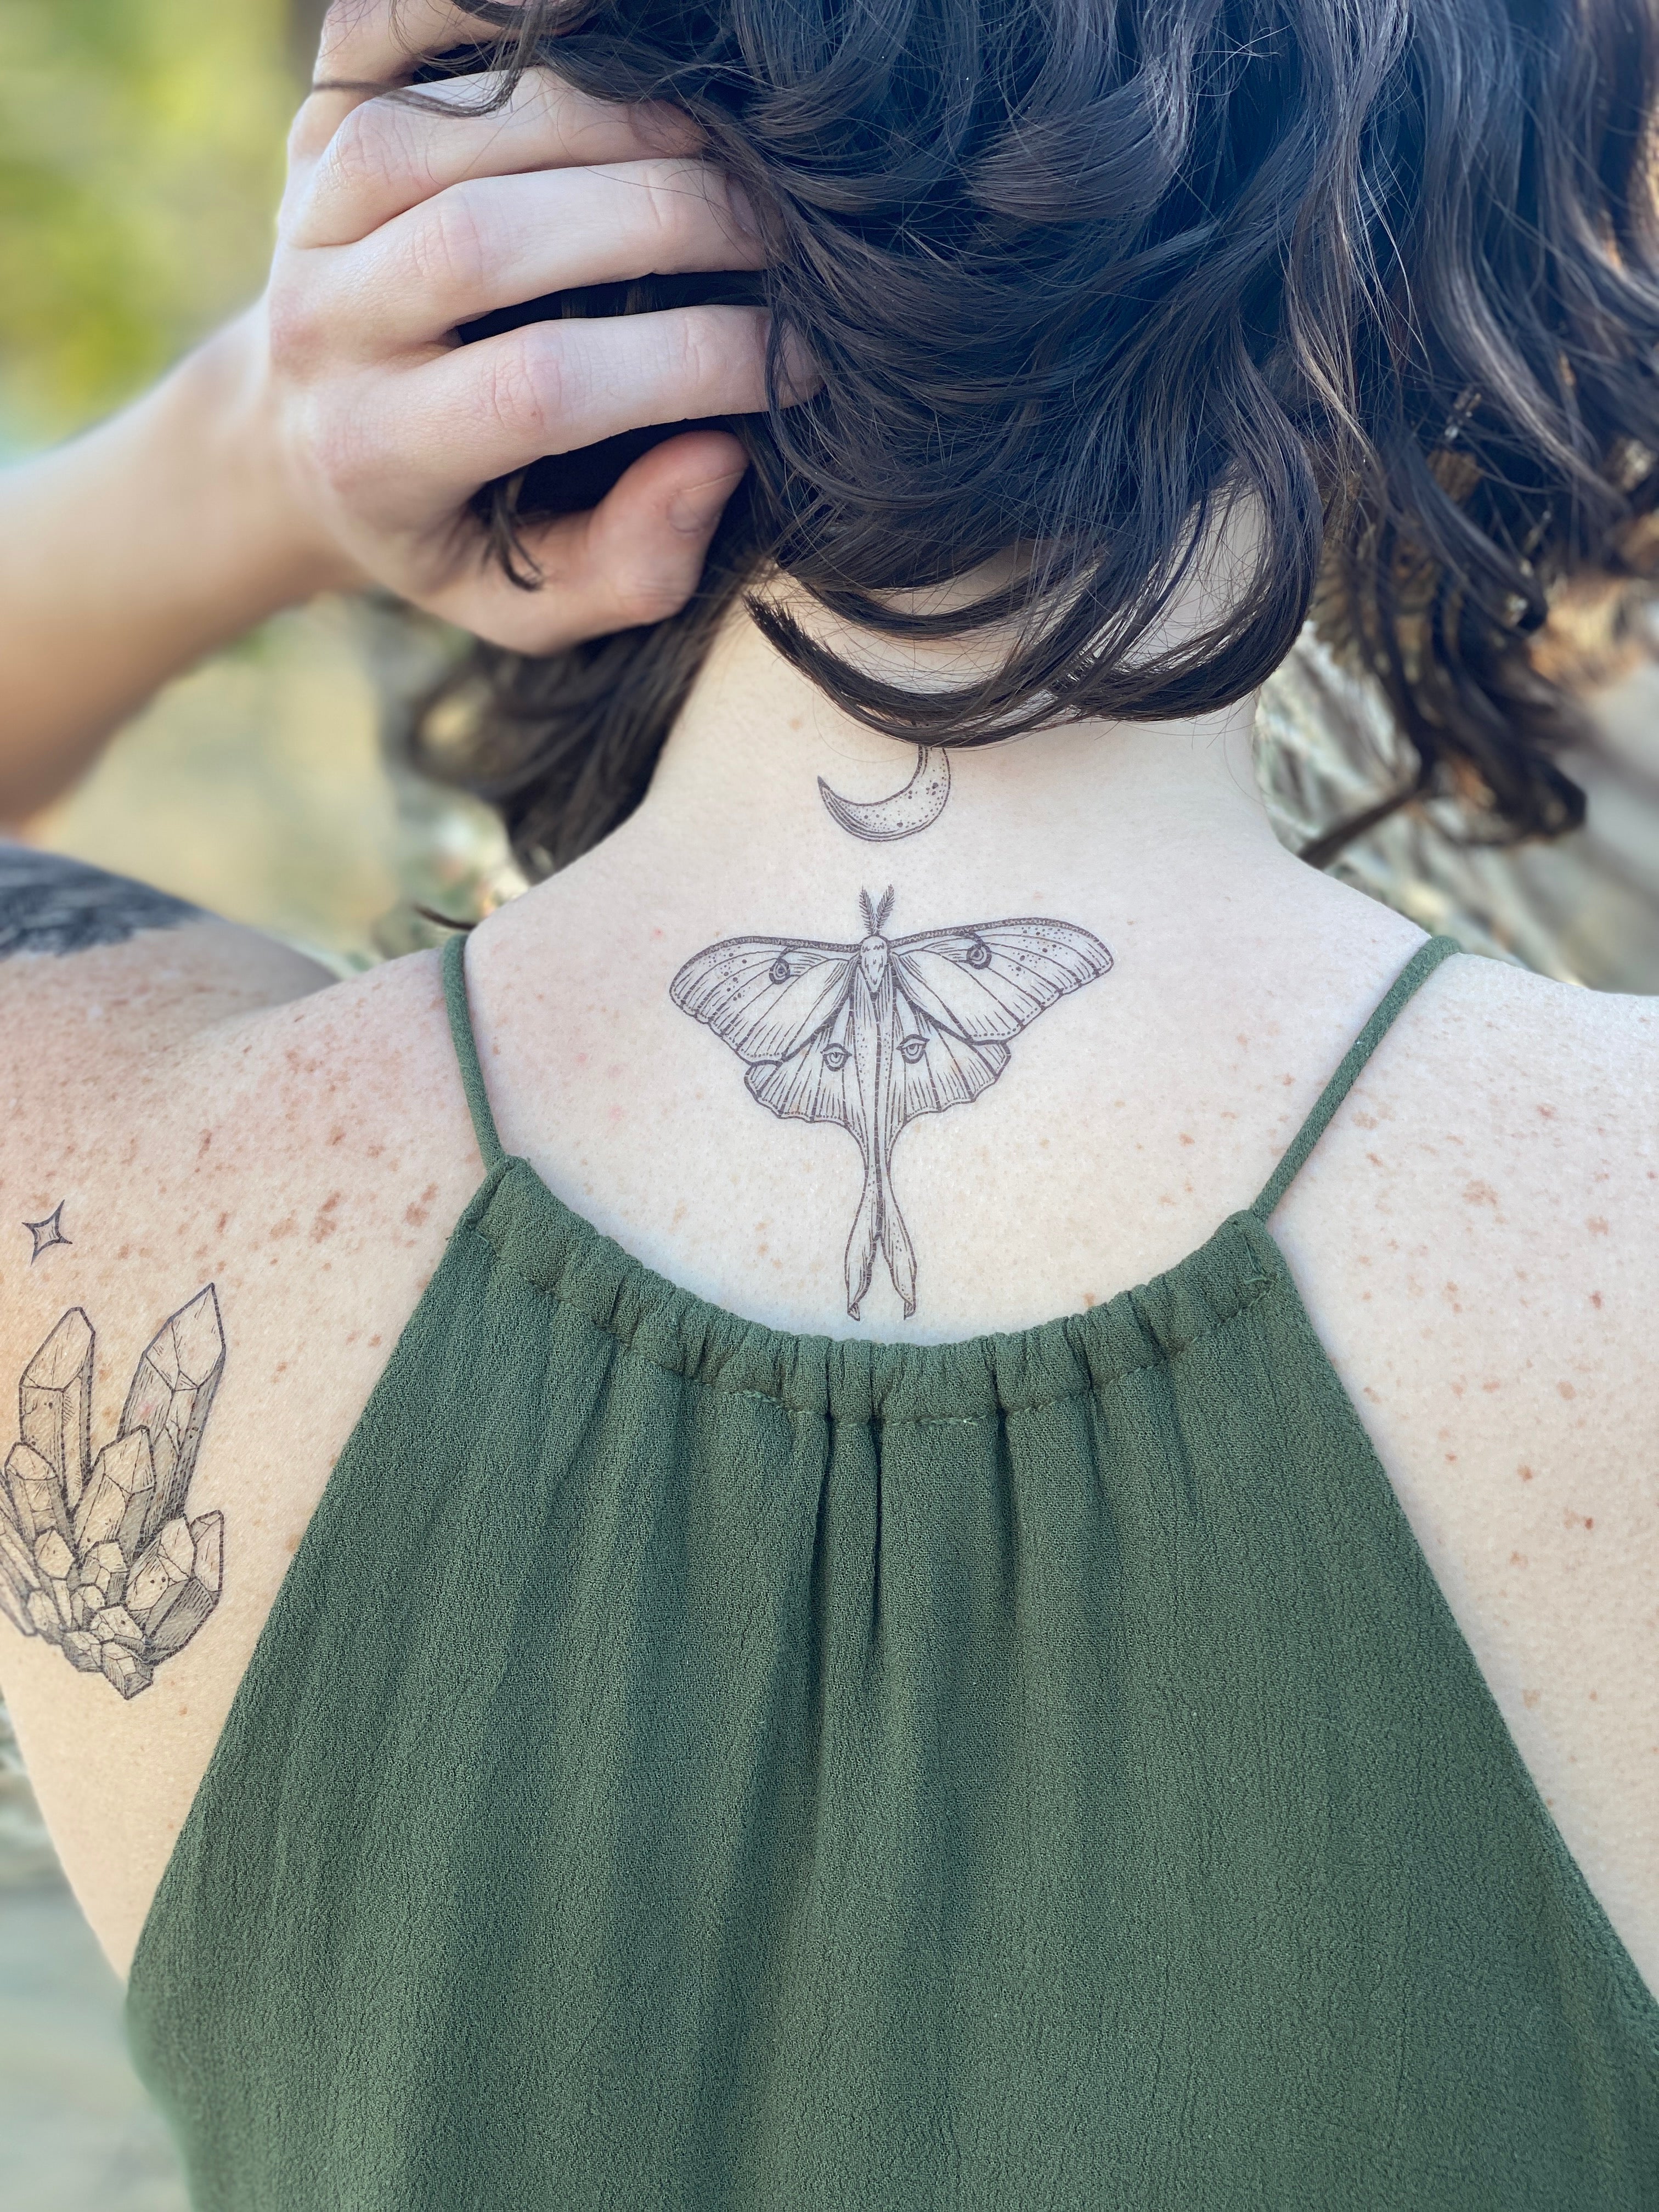 From Luna to Deaths Head 25 Magnificent Moth Tattoos